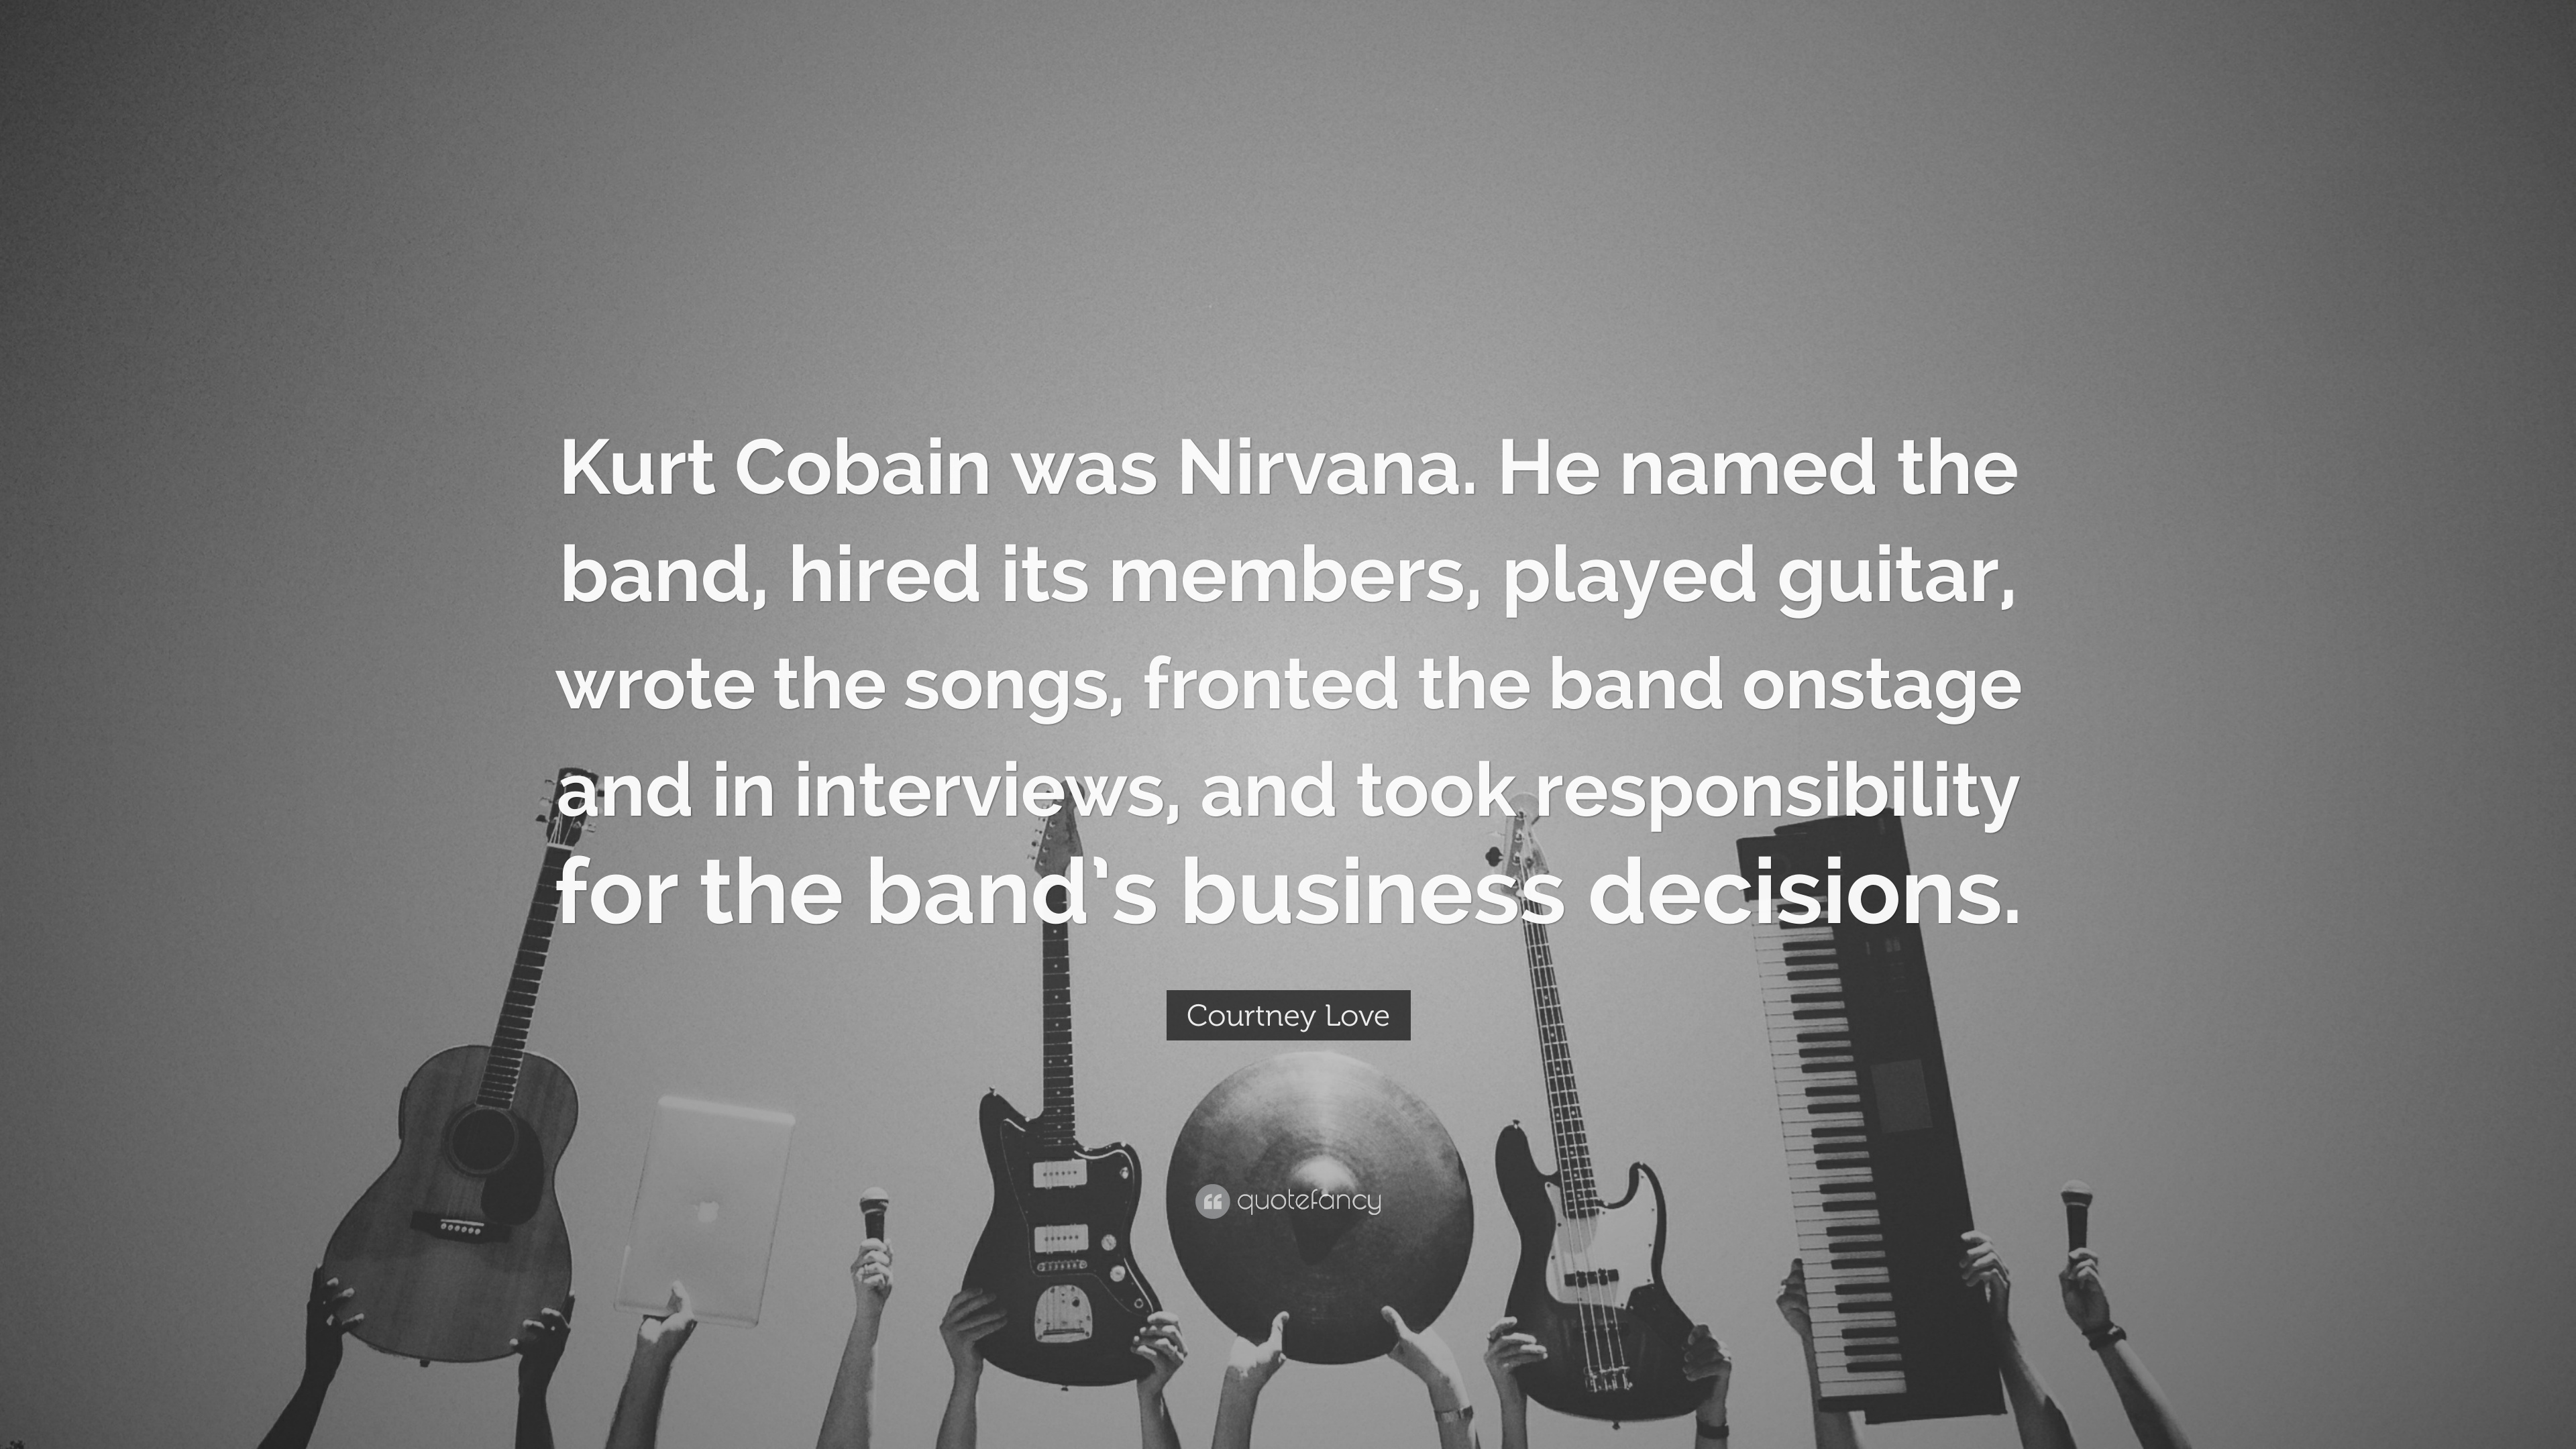 Courtney Love Quote: “Kurt Cobain was Nirvana. He named the band